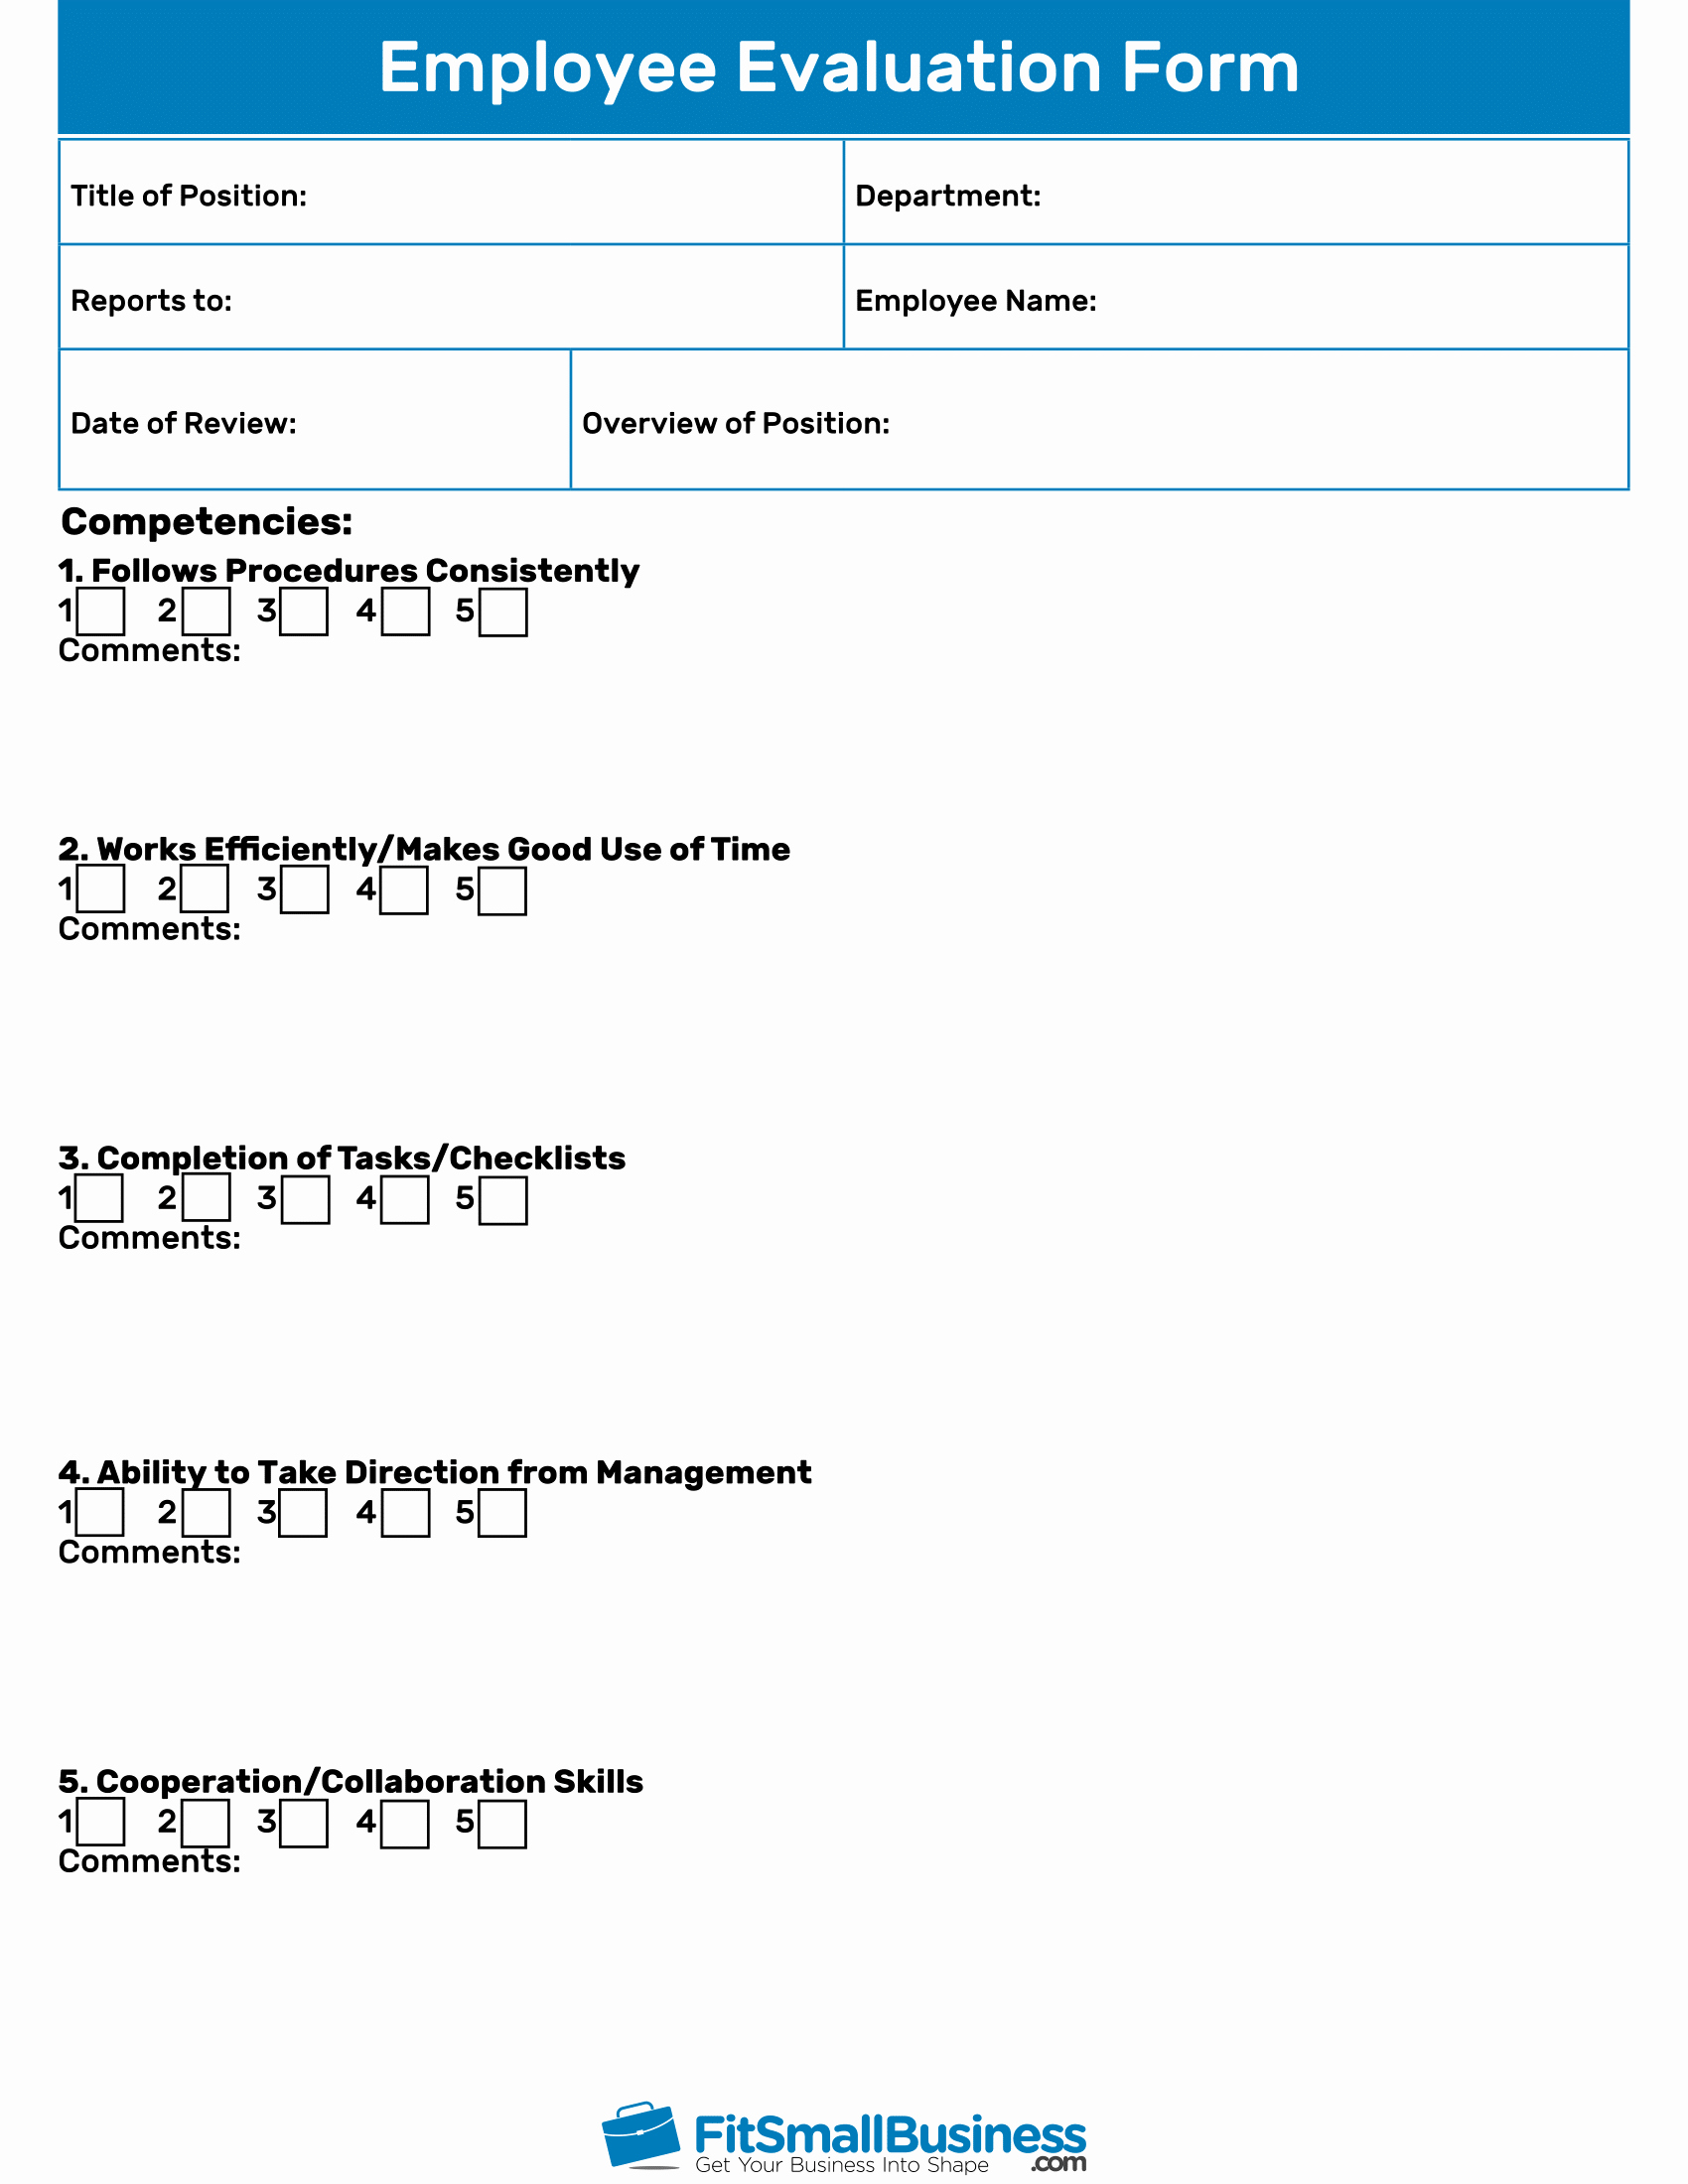 Employee Performance Evaluation form Inspirational Employee Evaluation forms [ Free Performance Review Templates]